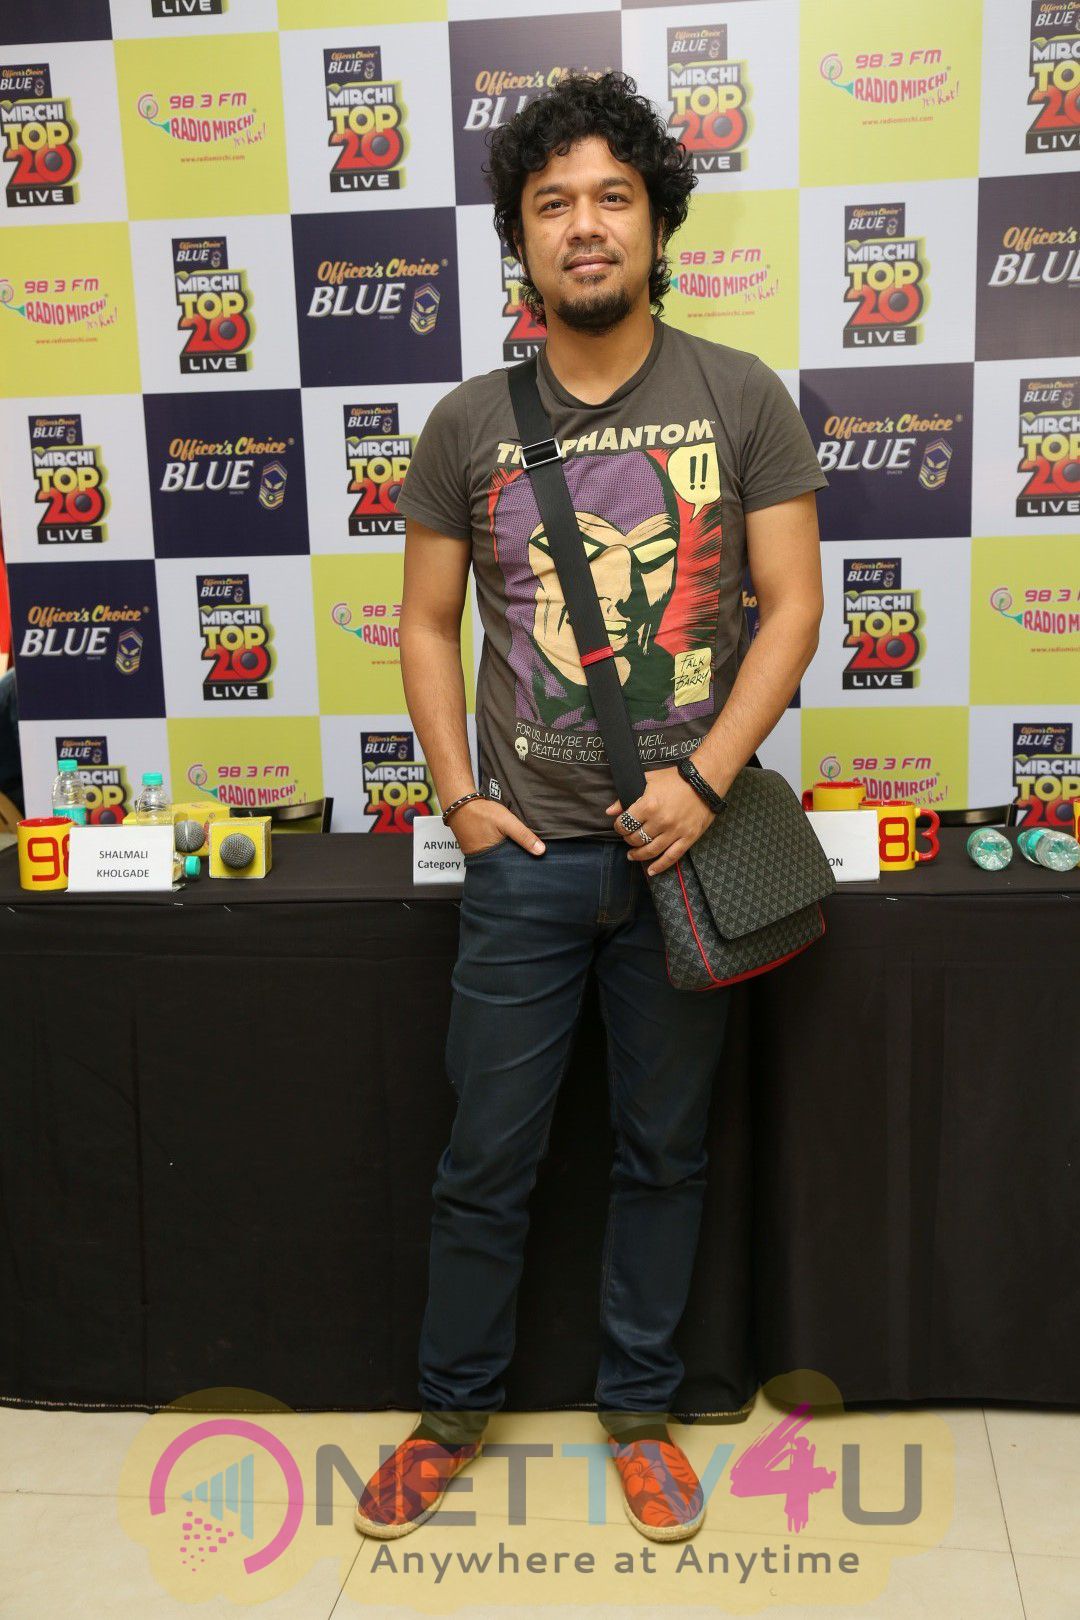 Announcement Of Mirchi Top 20 Concert With Papon & Shalmali Kholgade Photos Hindi Gallery